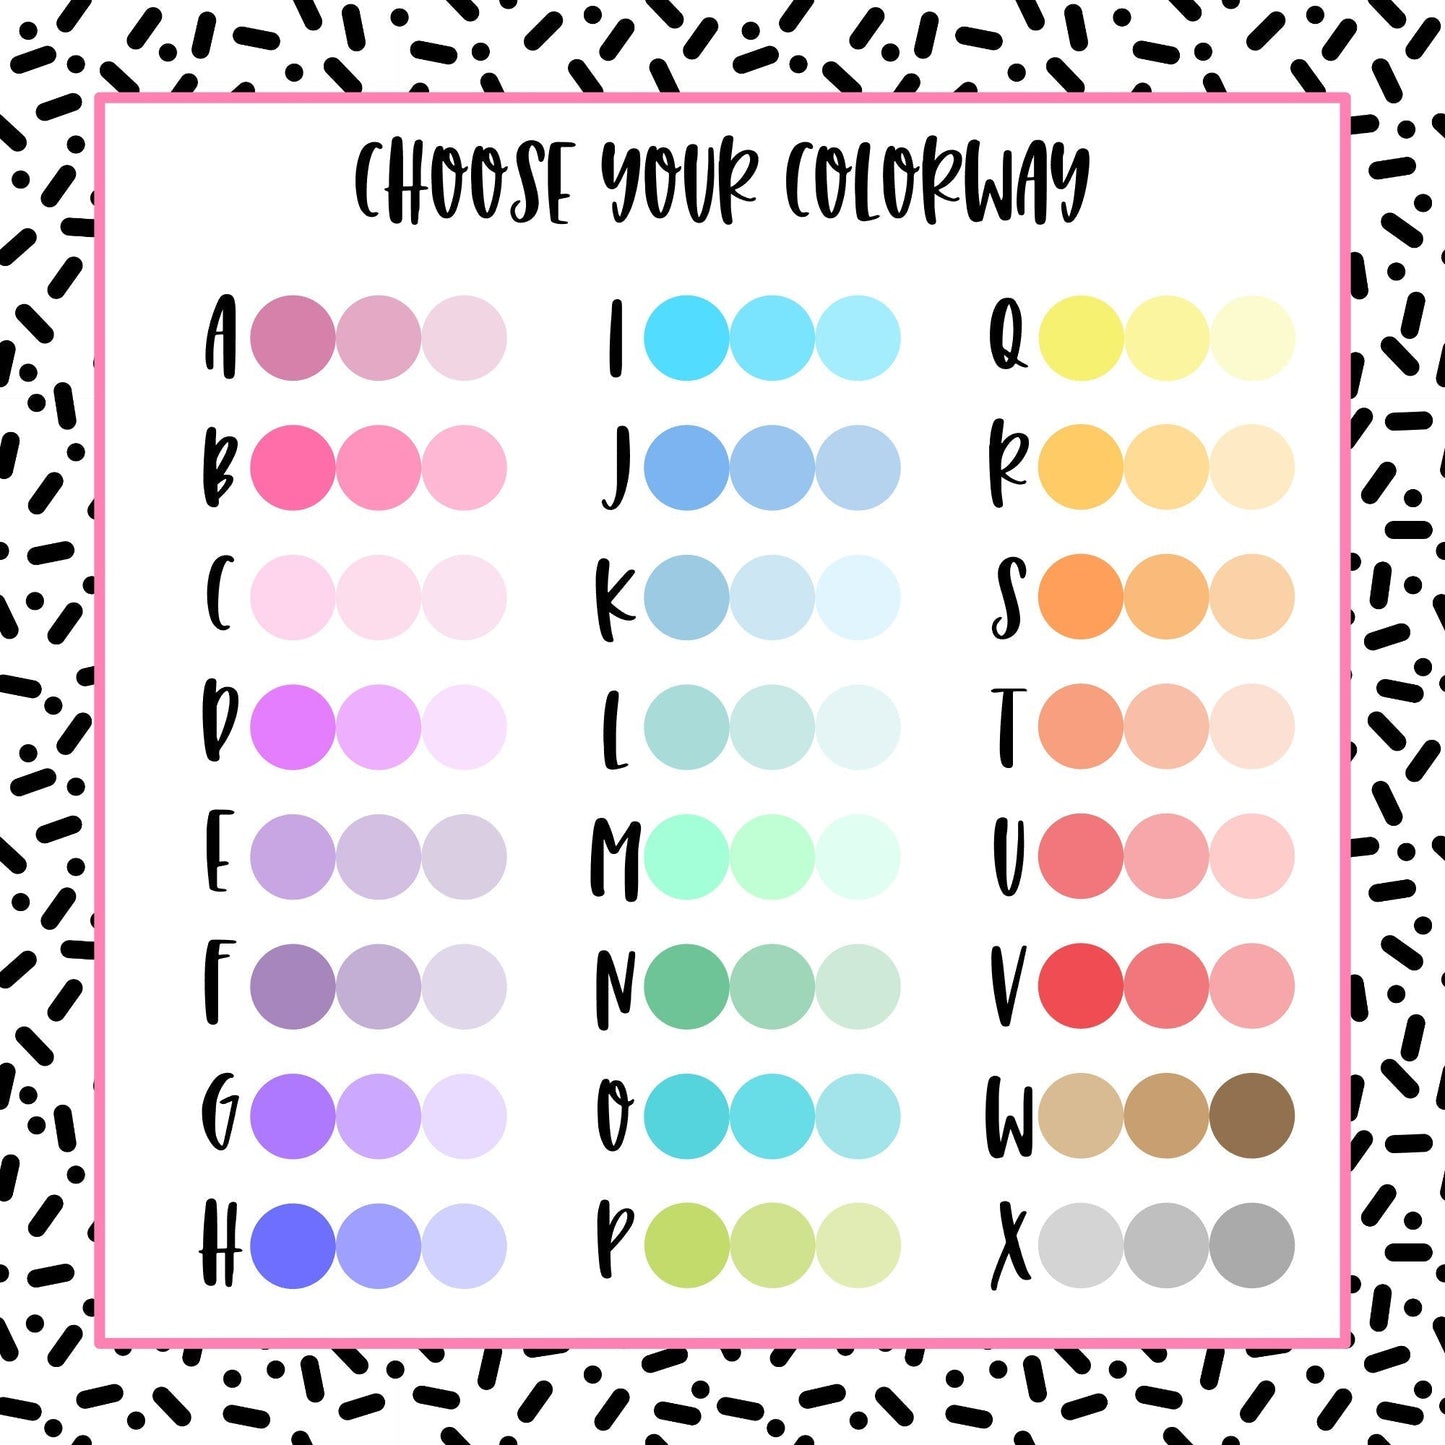 Multicolor Shadowed Boxes -small - 24 color options